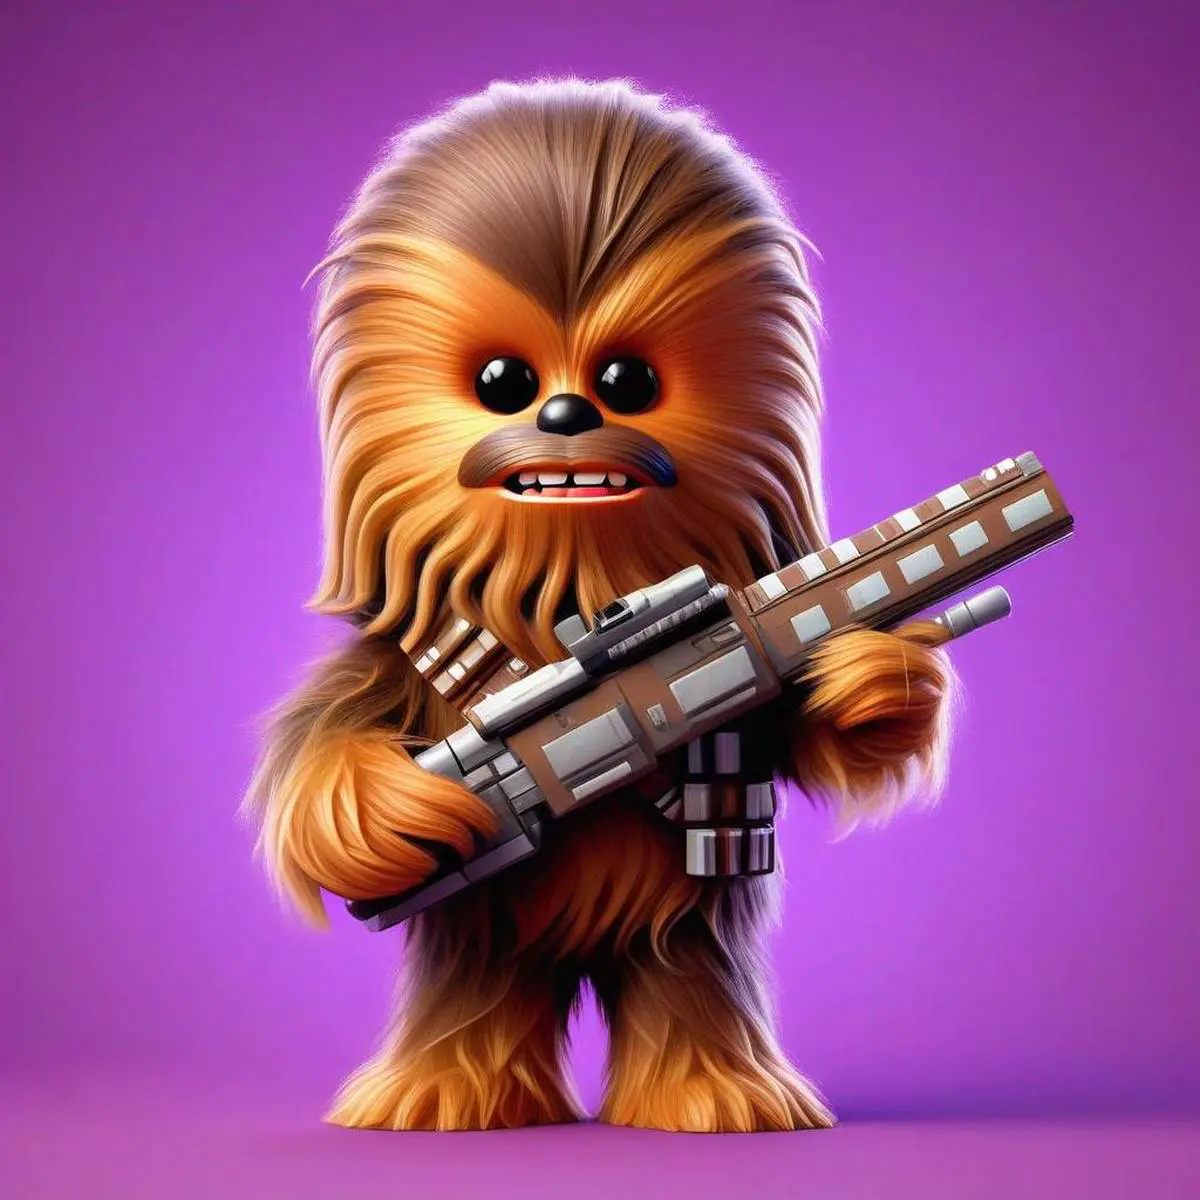 240+ Chewbacca Puns: Hairy-larious Jokes That'll Make You RRRR-oll with ...